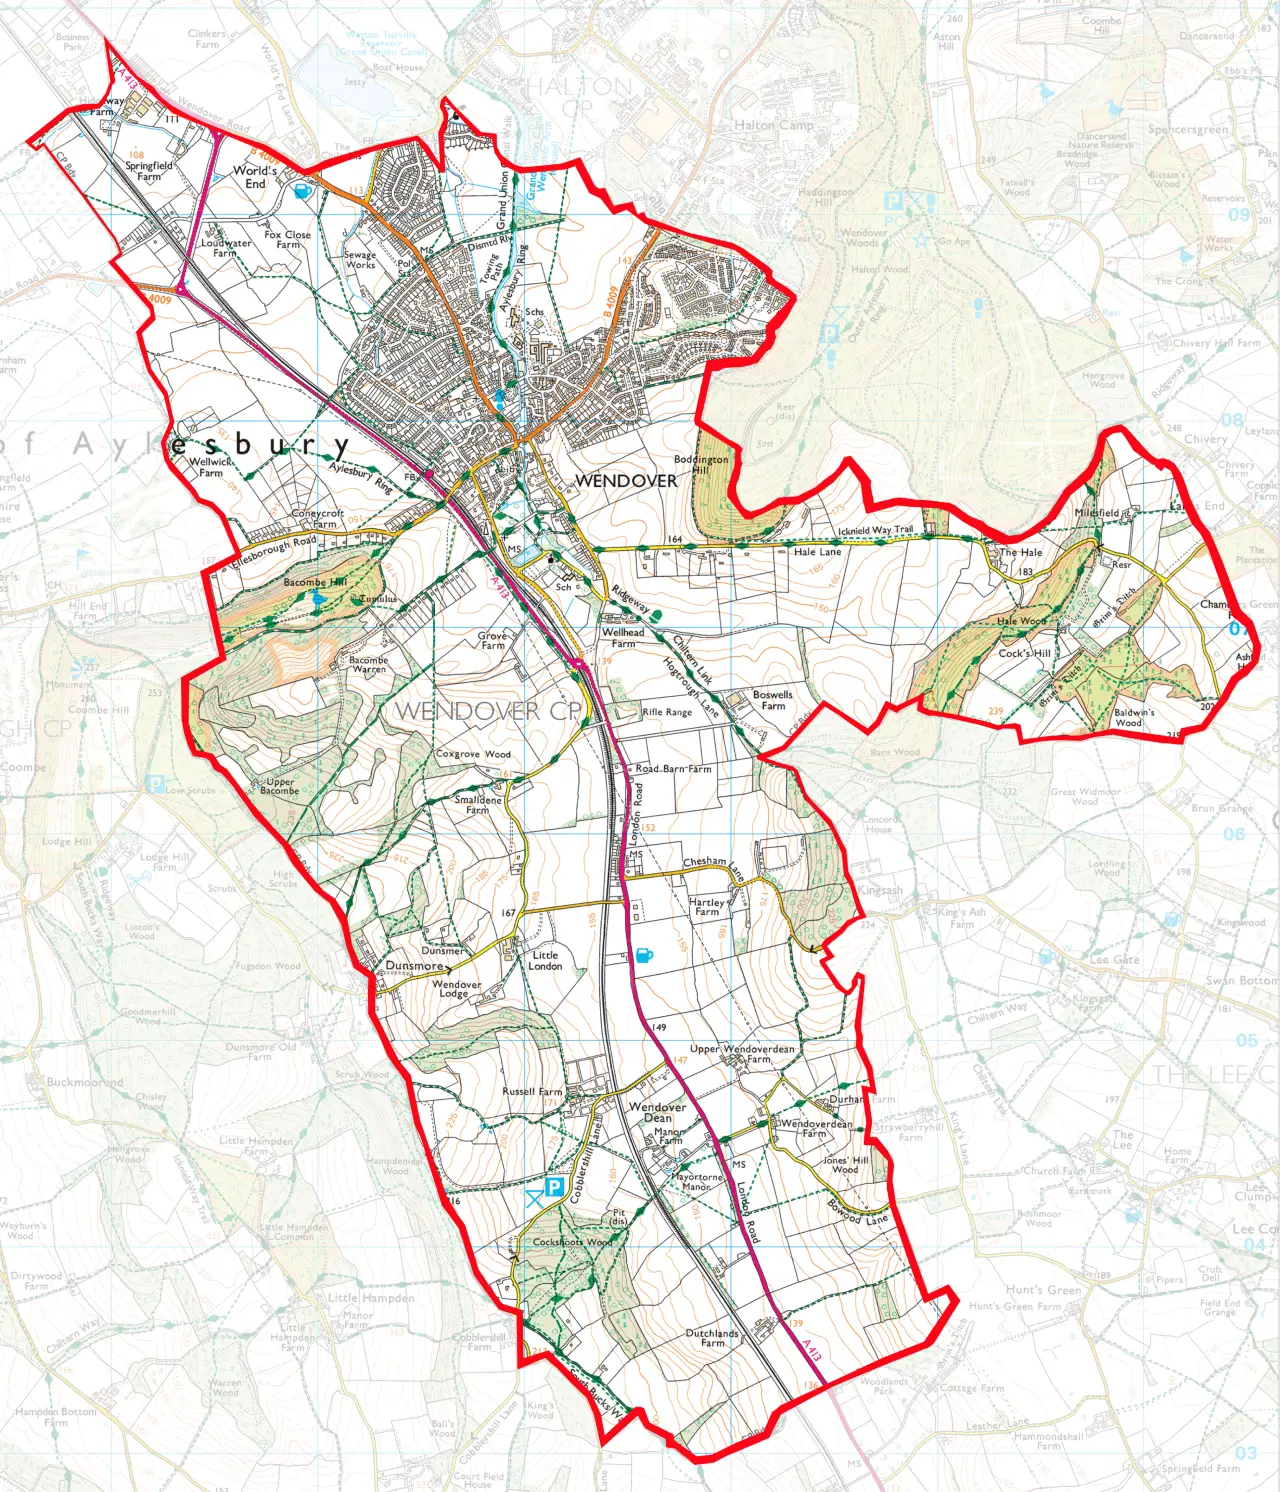 Wendover parish and Moor Park boundary map